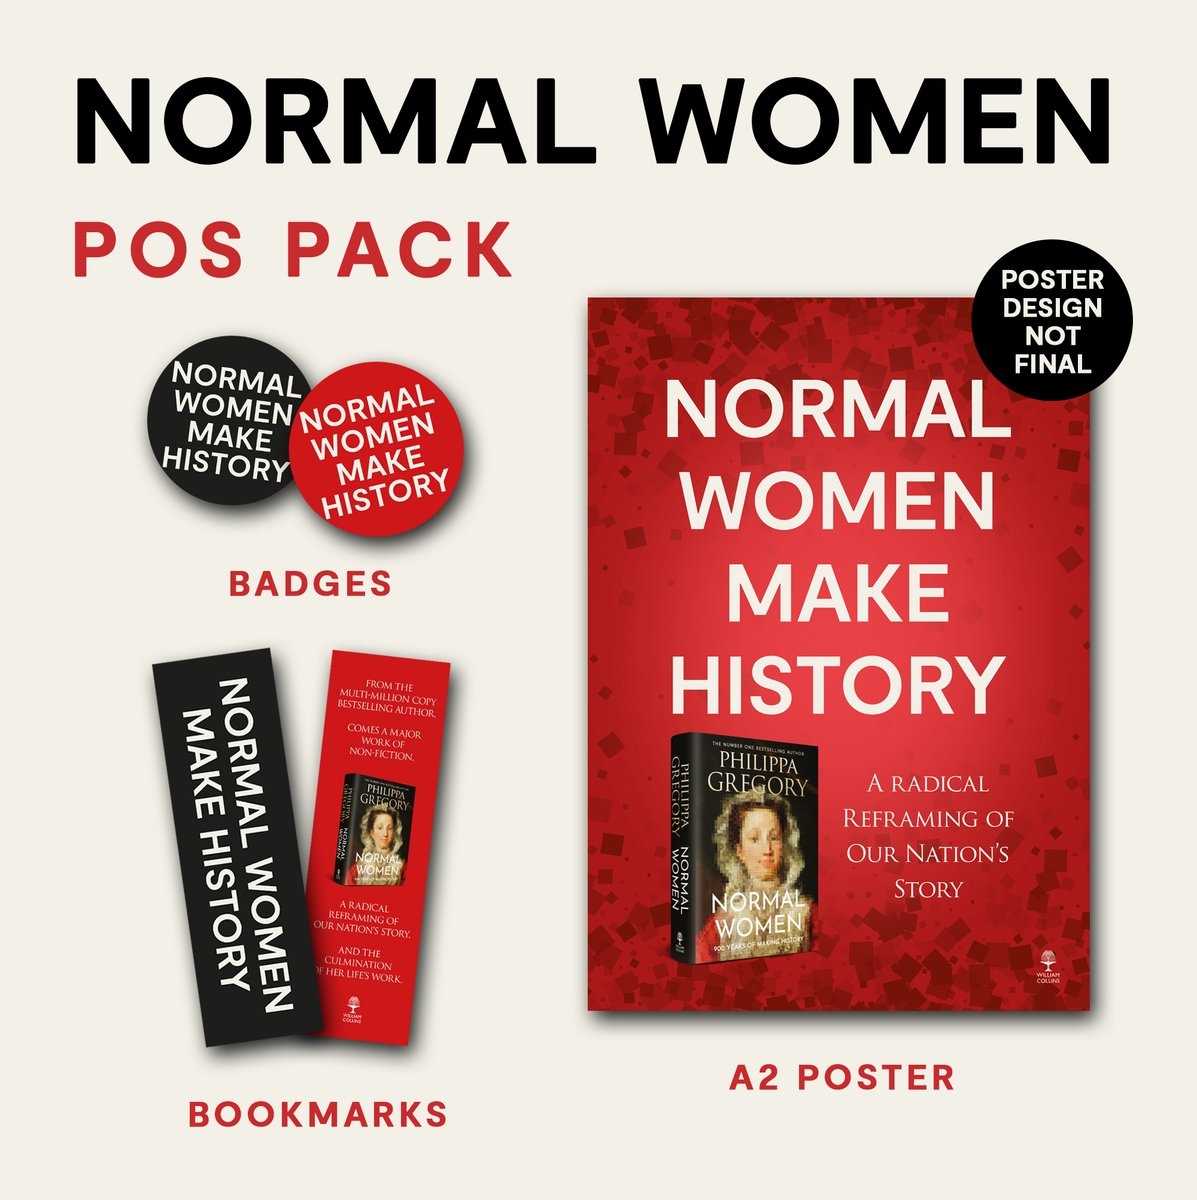 One of our foremost historical novelists, Philippa Gregory, makes history.

We have POS packs available to celebrate the upcoming release of #NormalWomen, including:

🔴 Badges
⚫️ Bookmarks
🔴 Posters

Booksellers, get in touch to request for your shop✨